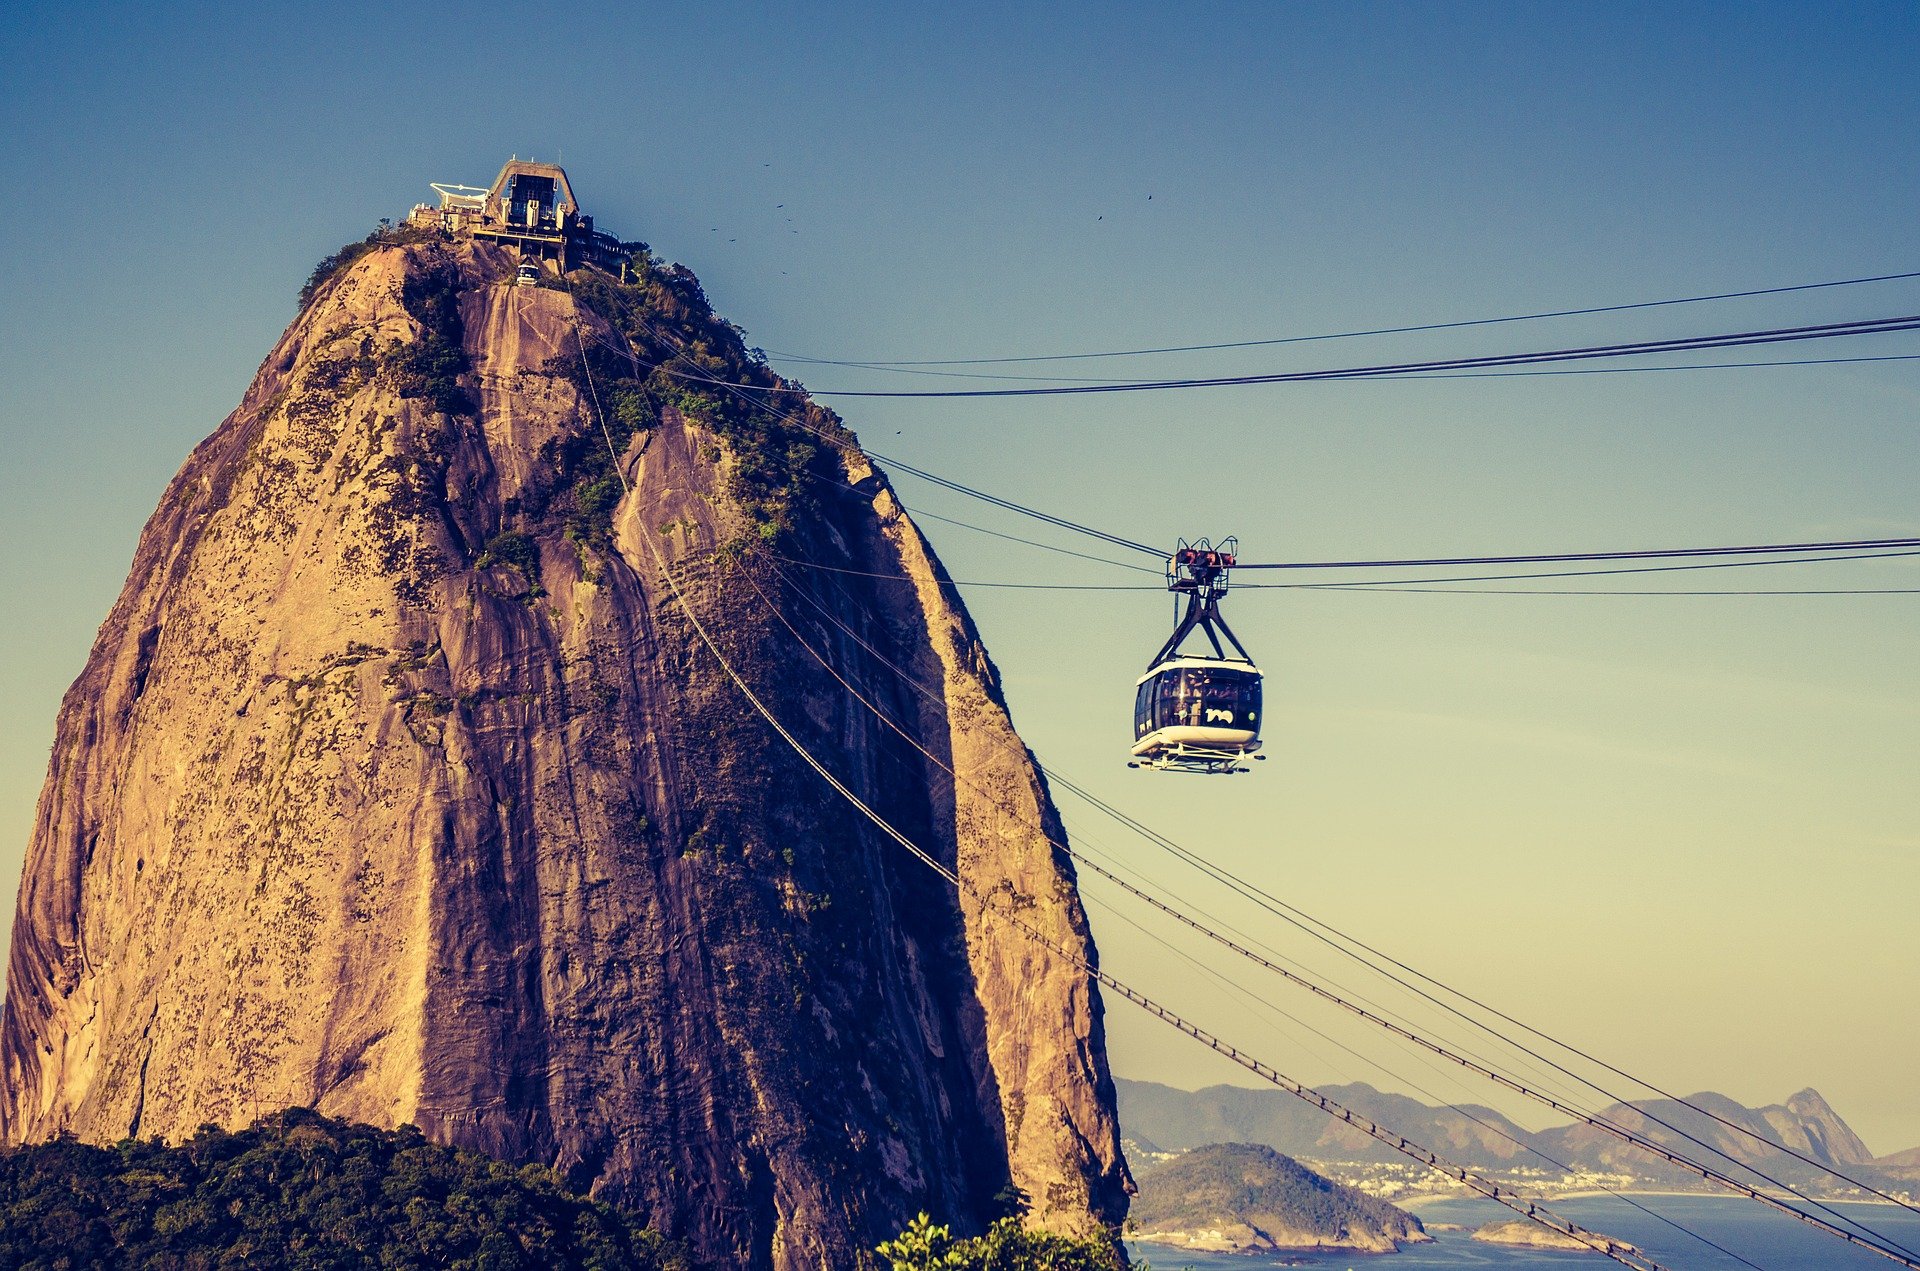 Things to Do in Brazil